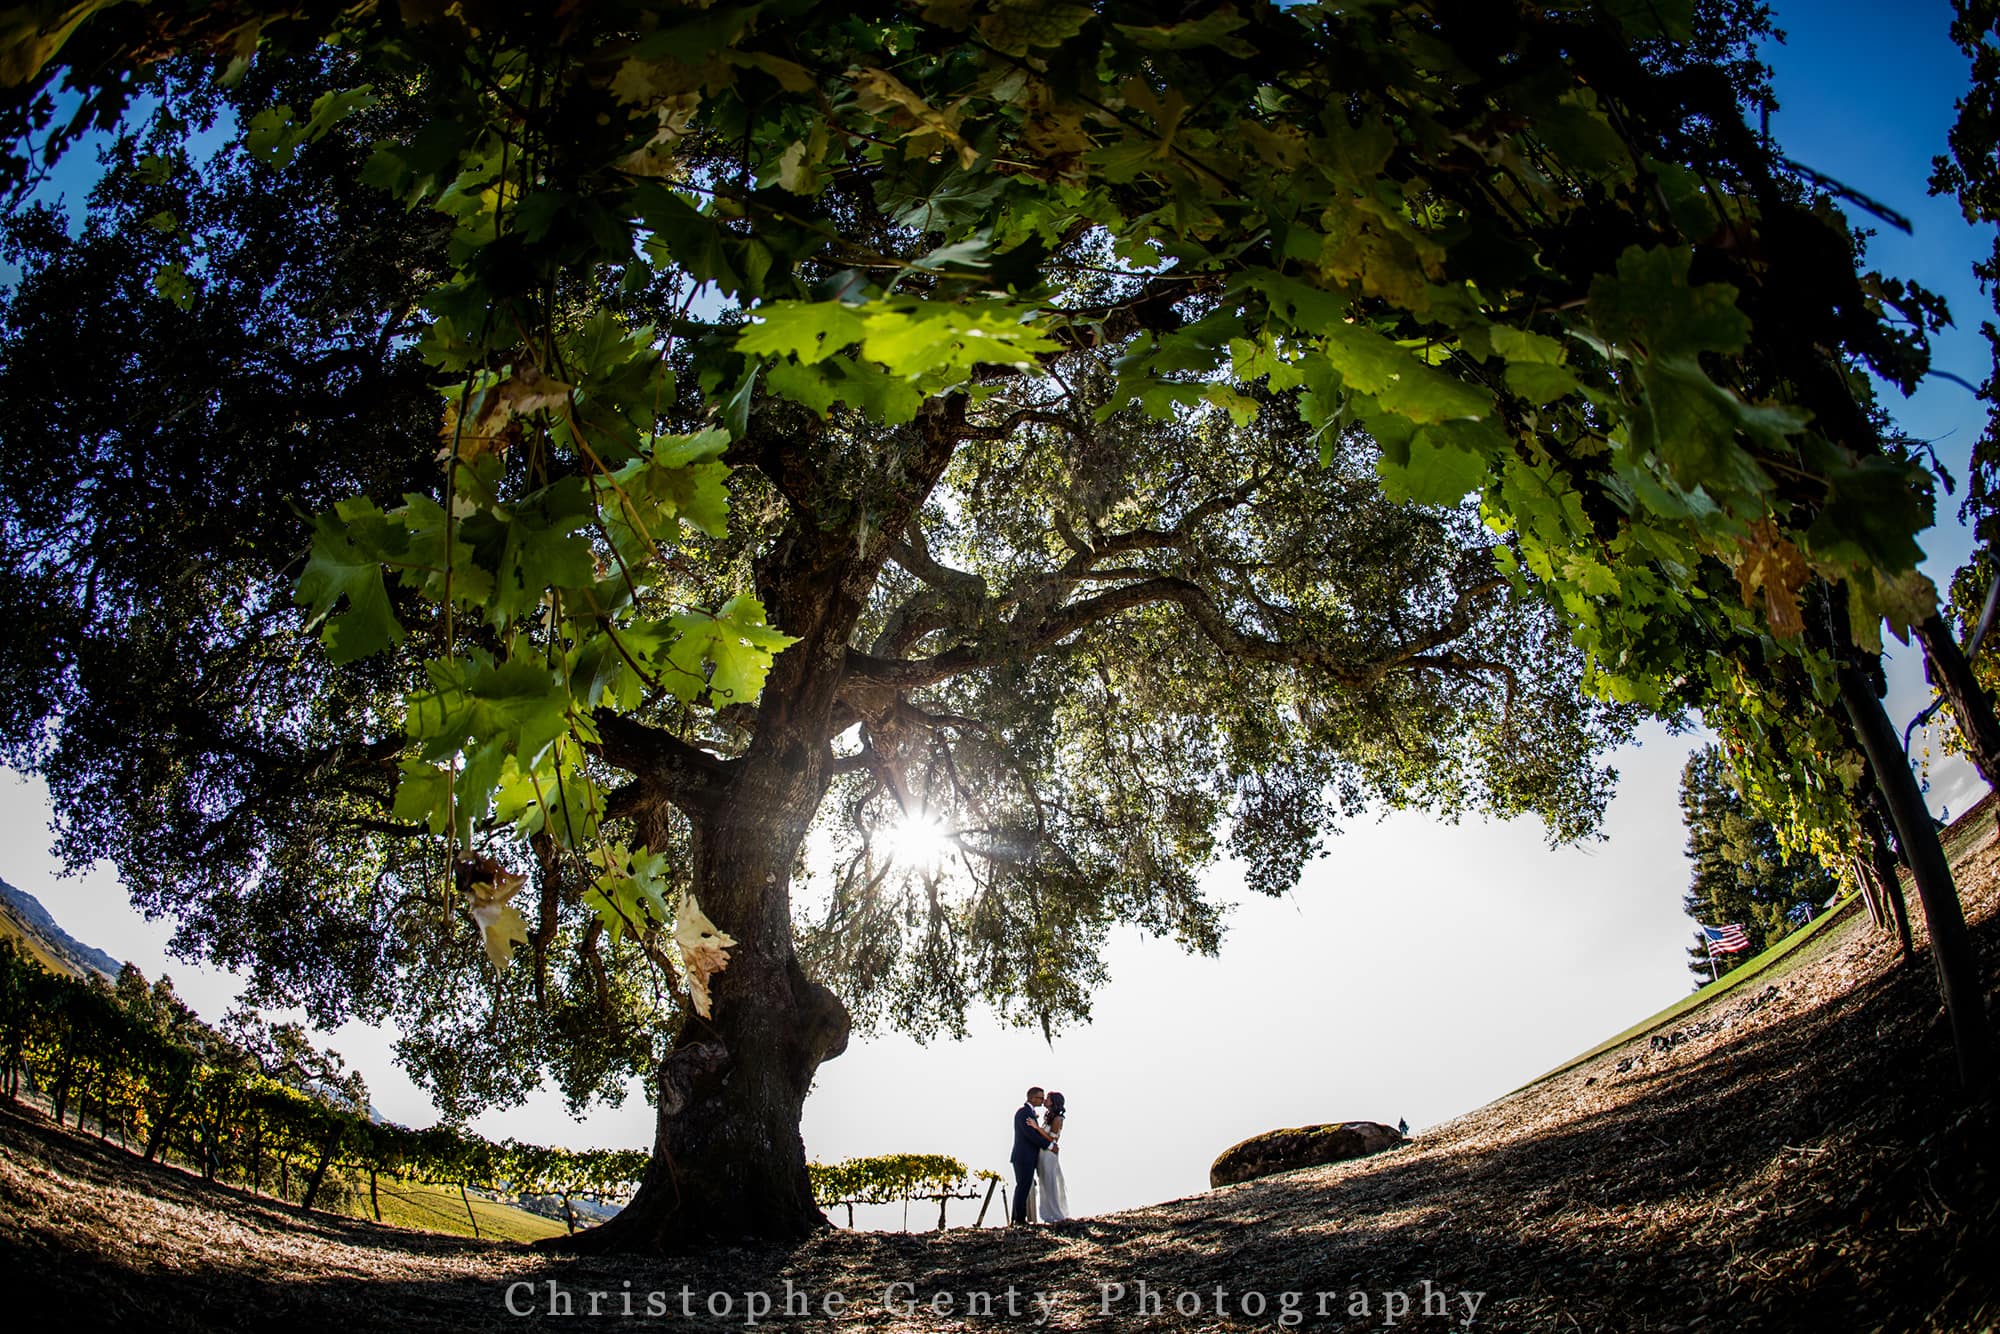 Elopement photography at Robert Young Winery in Geyserville in CA